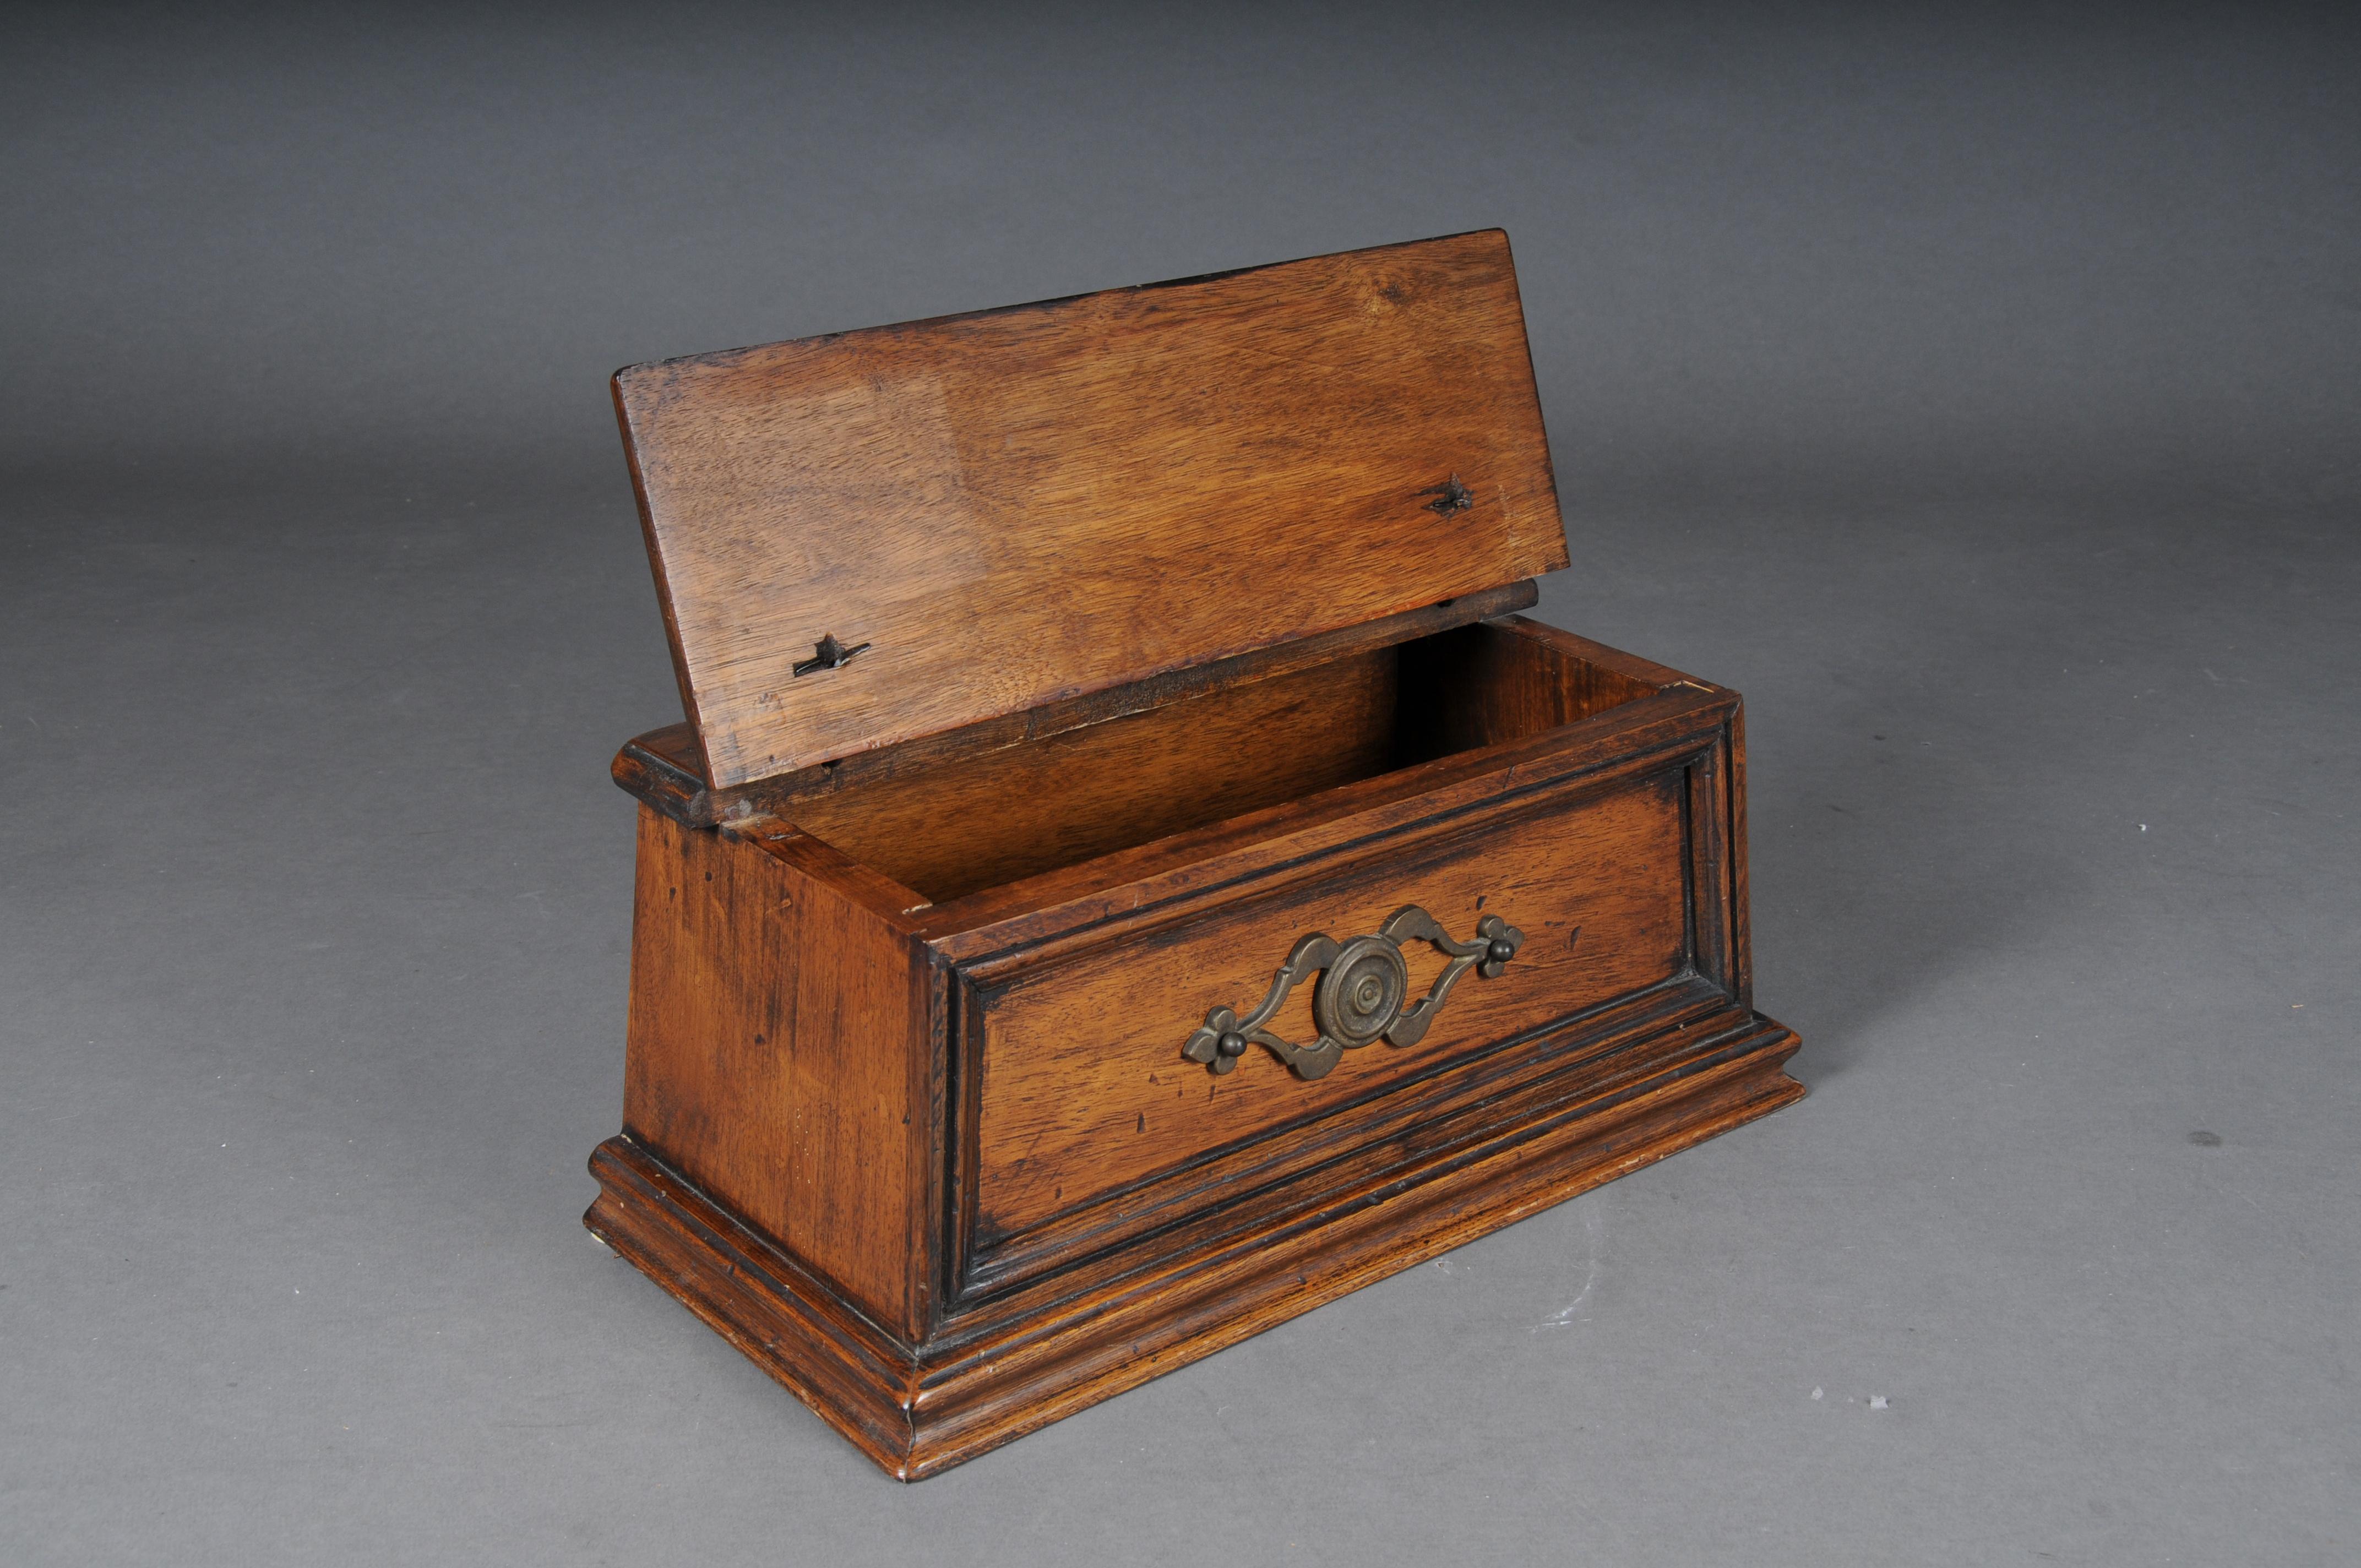 19th Century Antique Oak Briefnbox/Casket, Germany

Rectangular solid oak body with fittings. The box is relatively large and wide and offers a lot of space. The box can be used in many ways and is also very decorative.